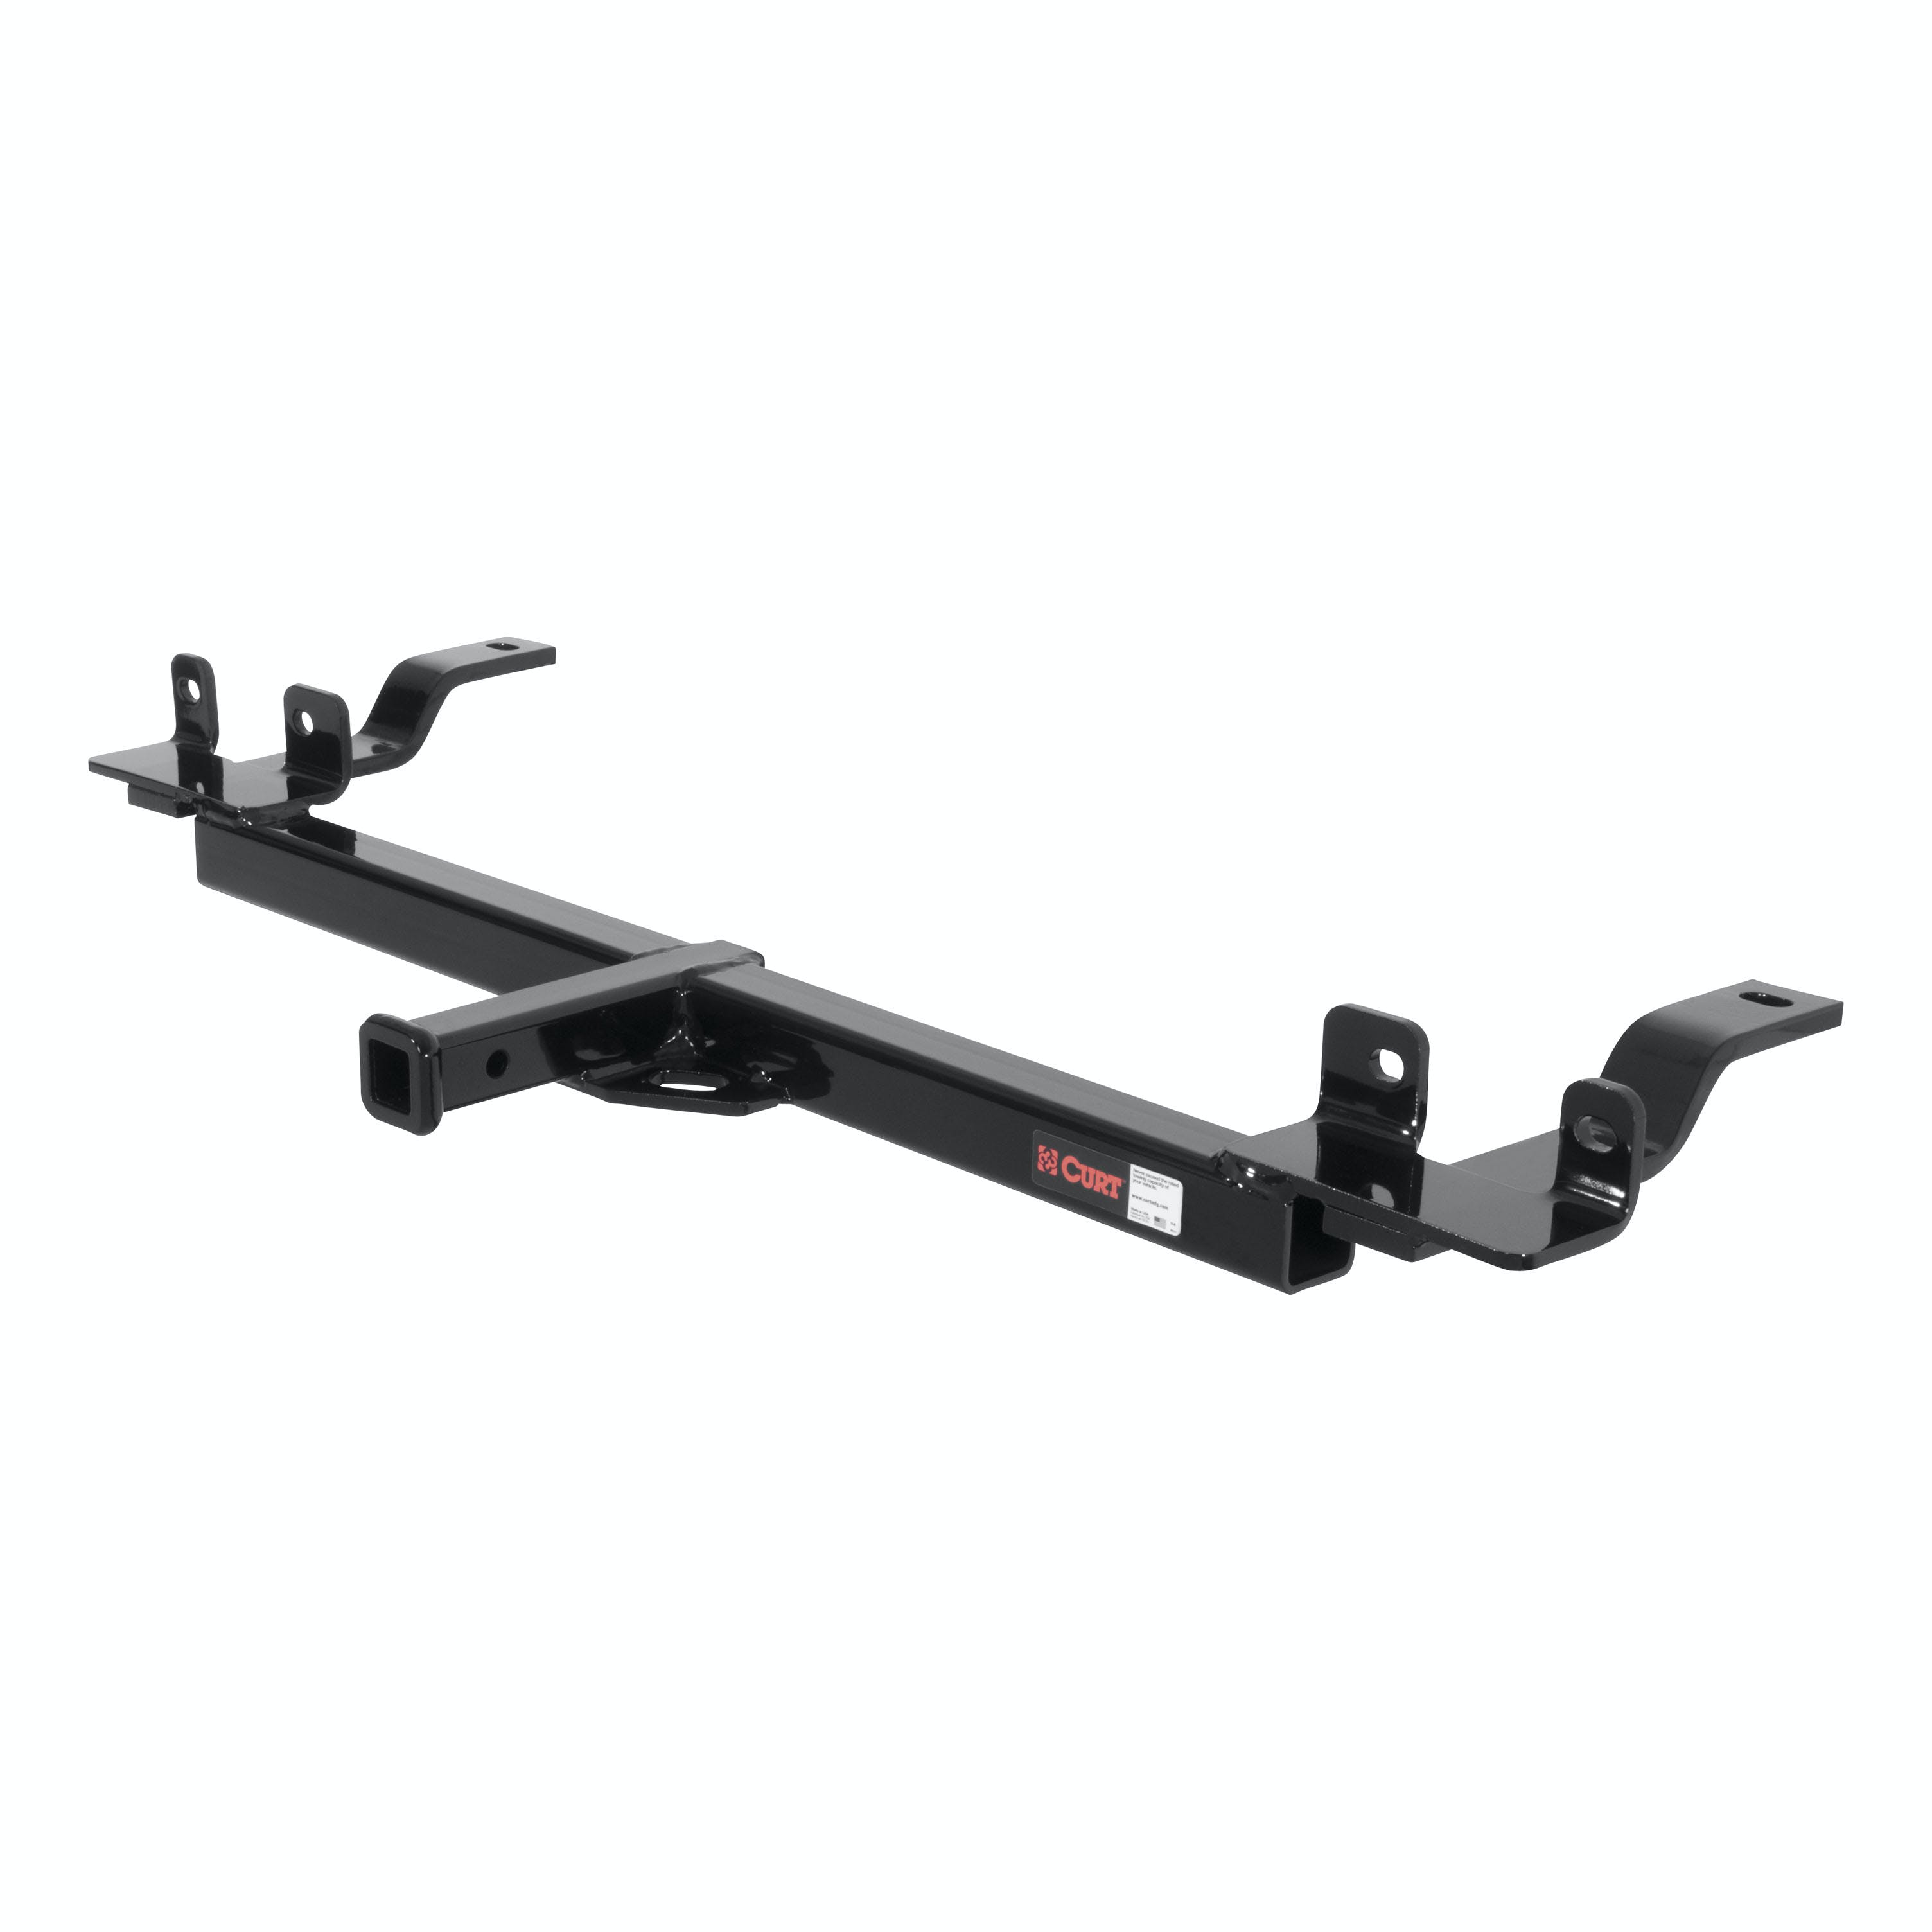 CURT 12006 Class 2 Trailer Hitch, 1-1/4 Receiver, Select Dodge Intrepid